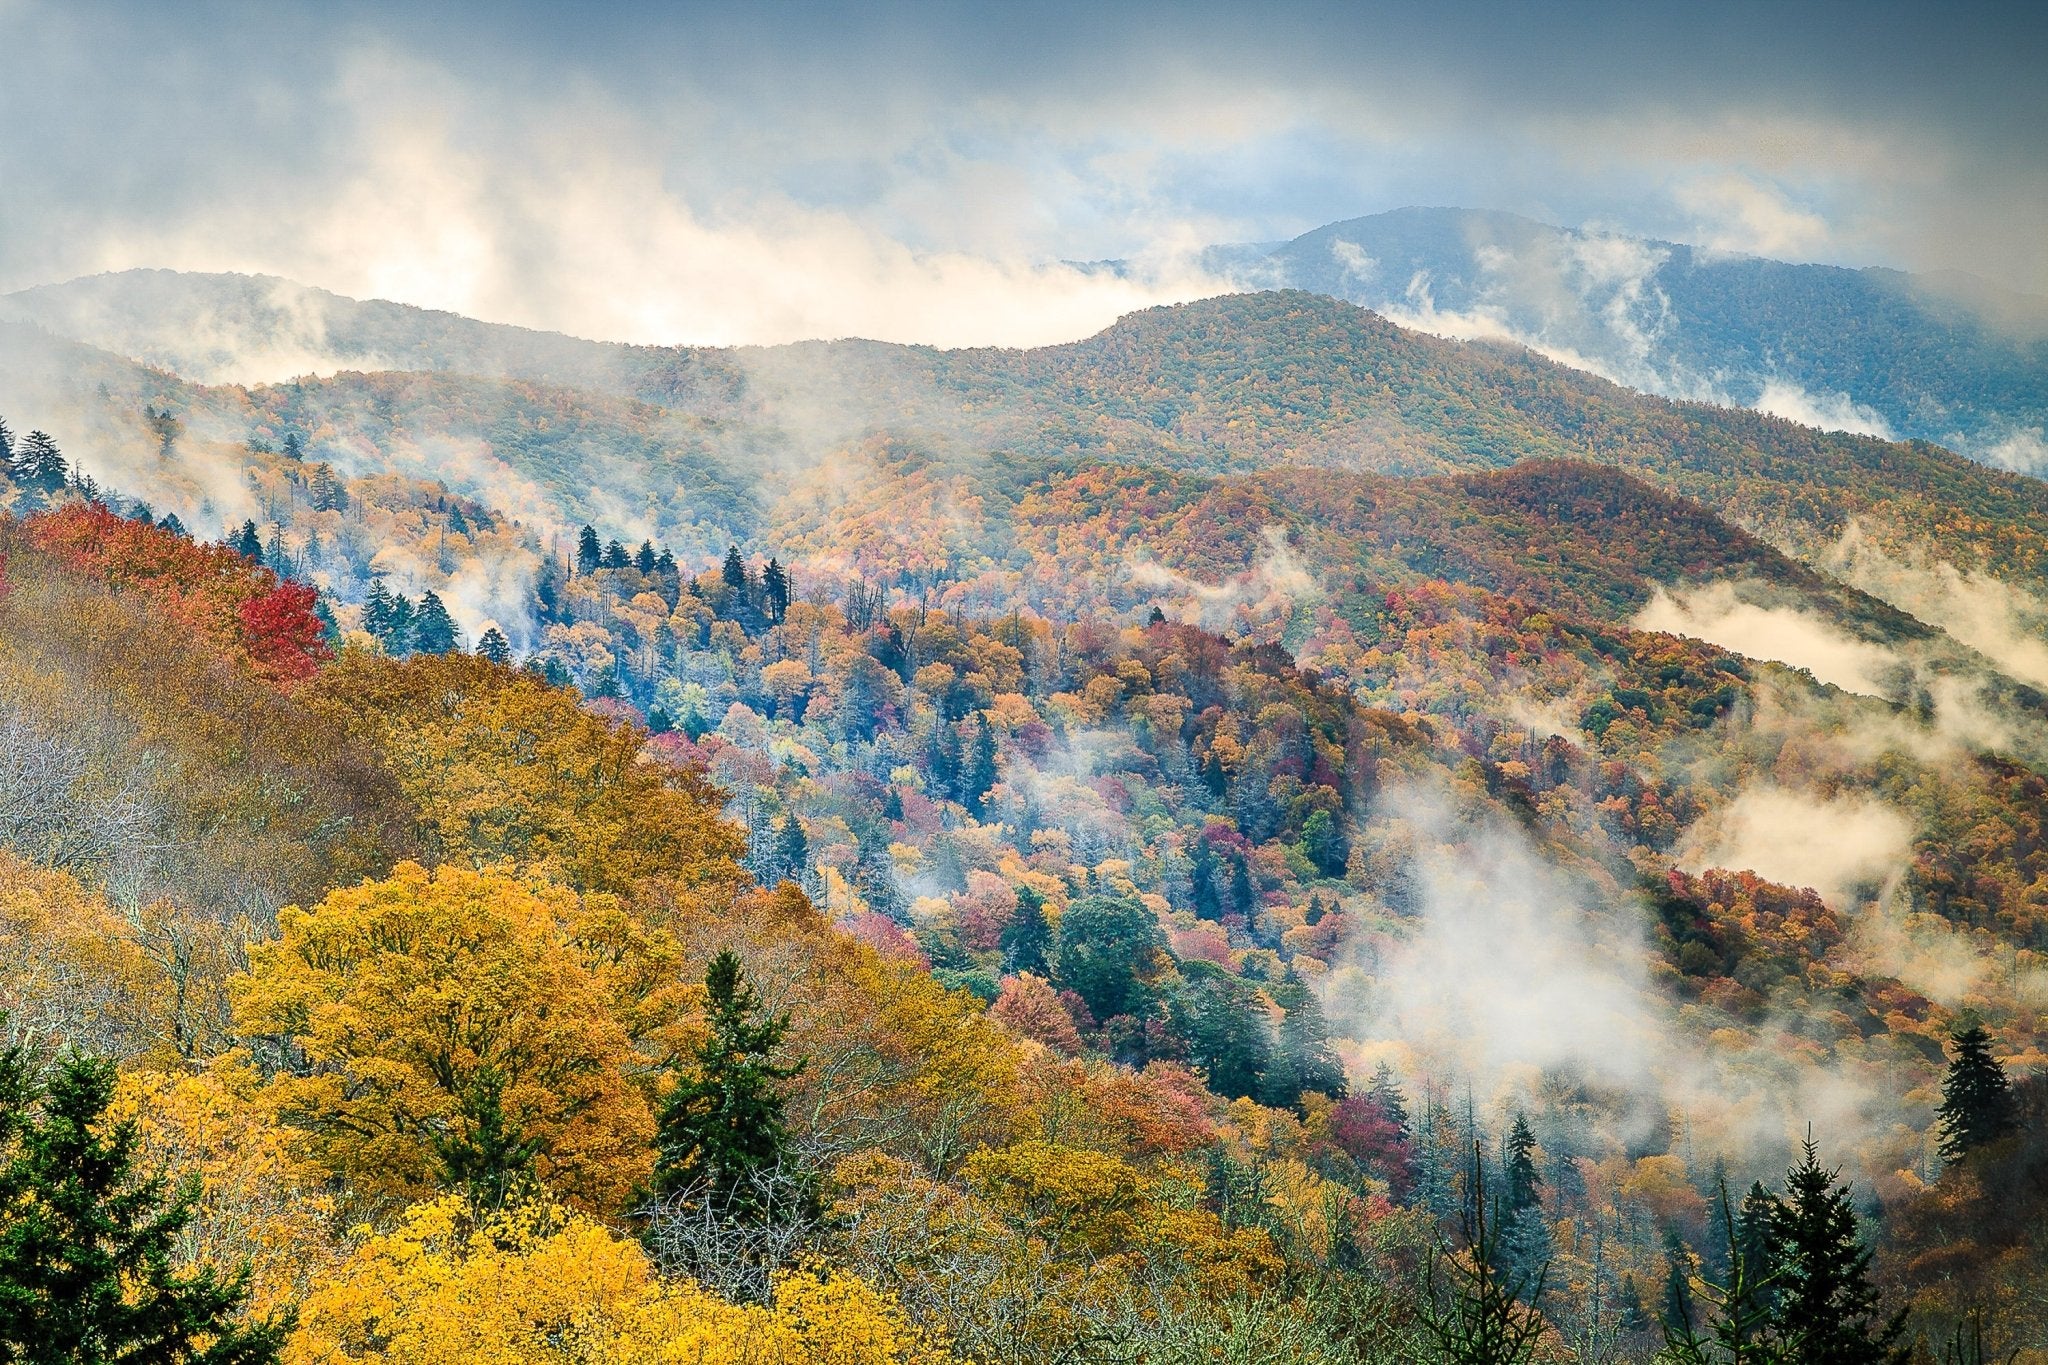 Great Smoky Mountains National Park: Enchanting Wilderness in the Appalachians - My Nature Book Adventures